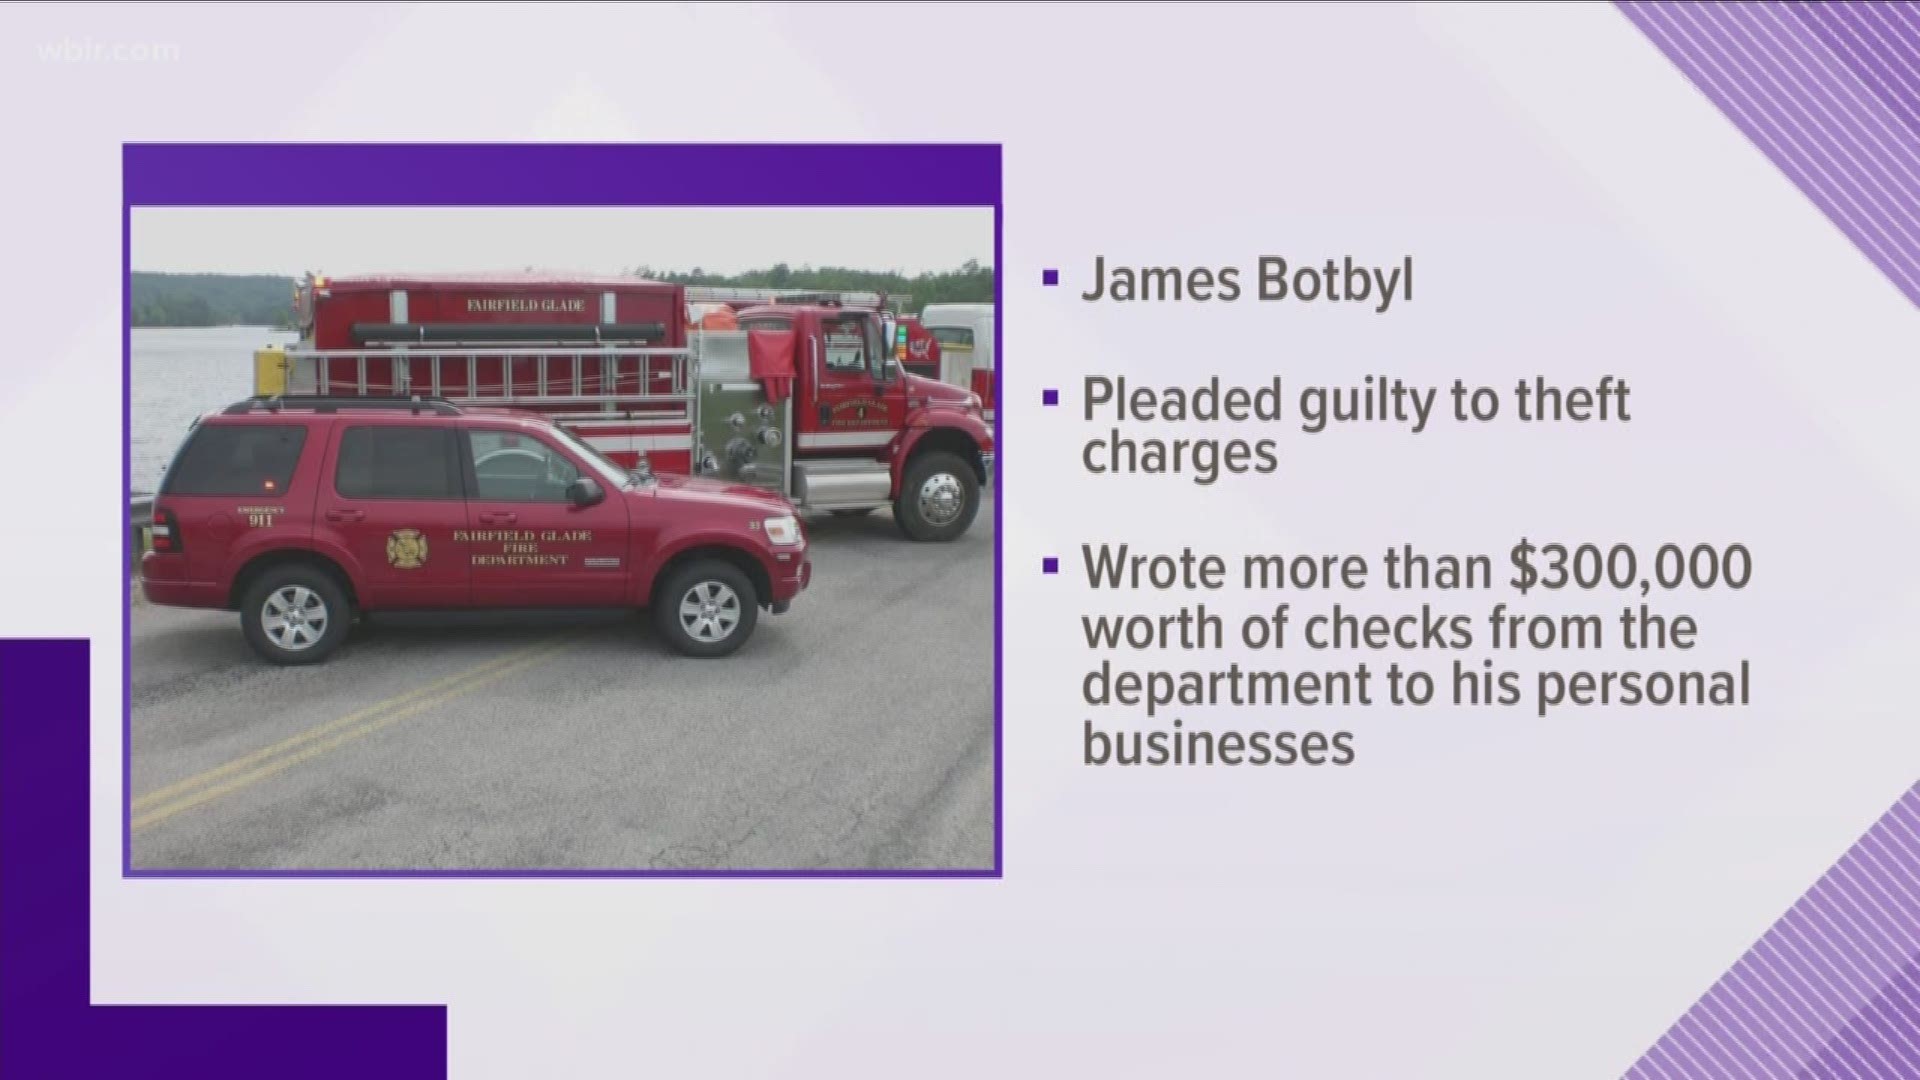 Investigators determined that he wrote 64 fire department checks totaling $302,303 payable to one of his two personal businesses.